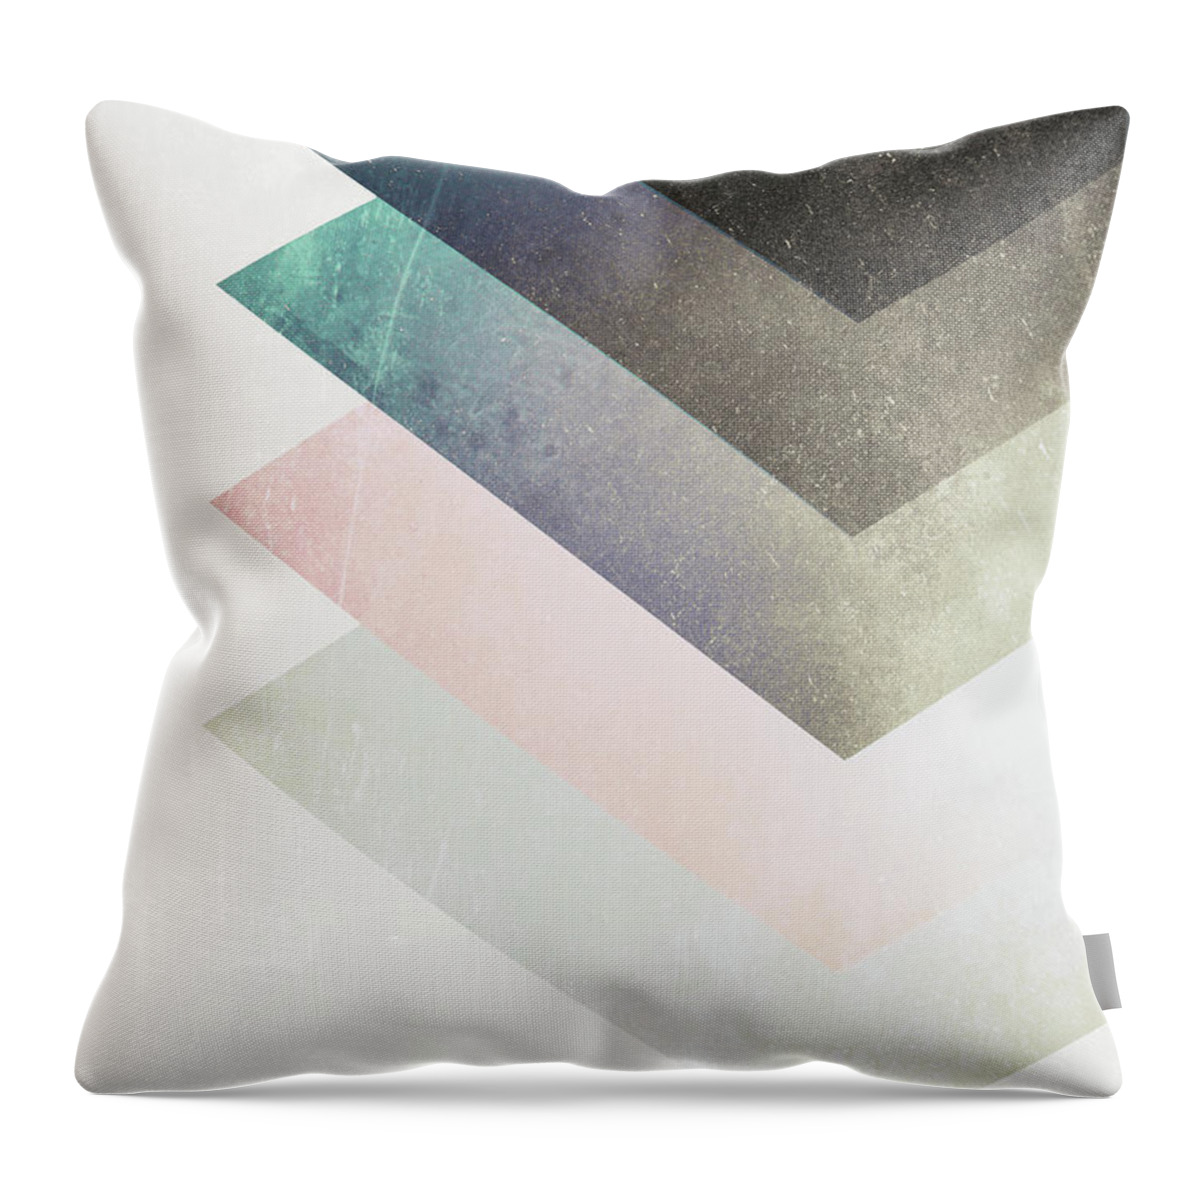 Geometric Throw Pillow featuring the mixed media Geometric Layers by Emanuela Carratoni